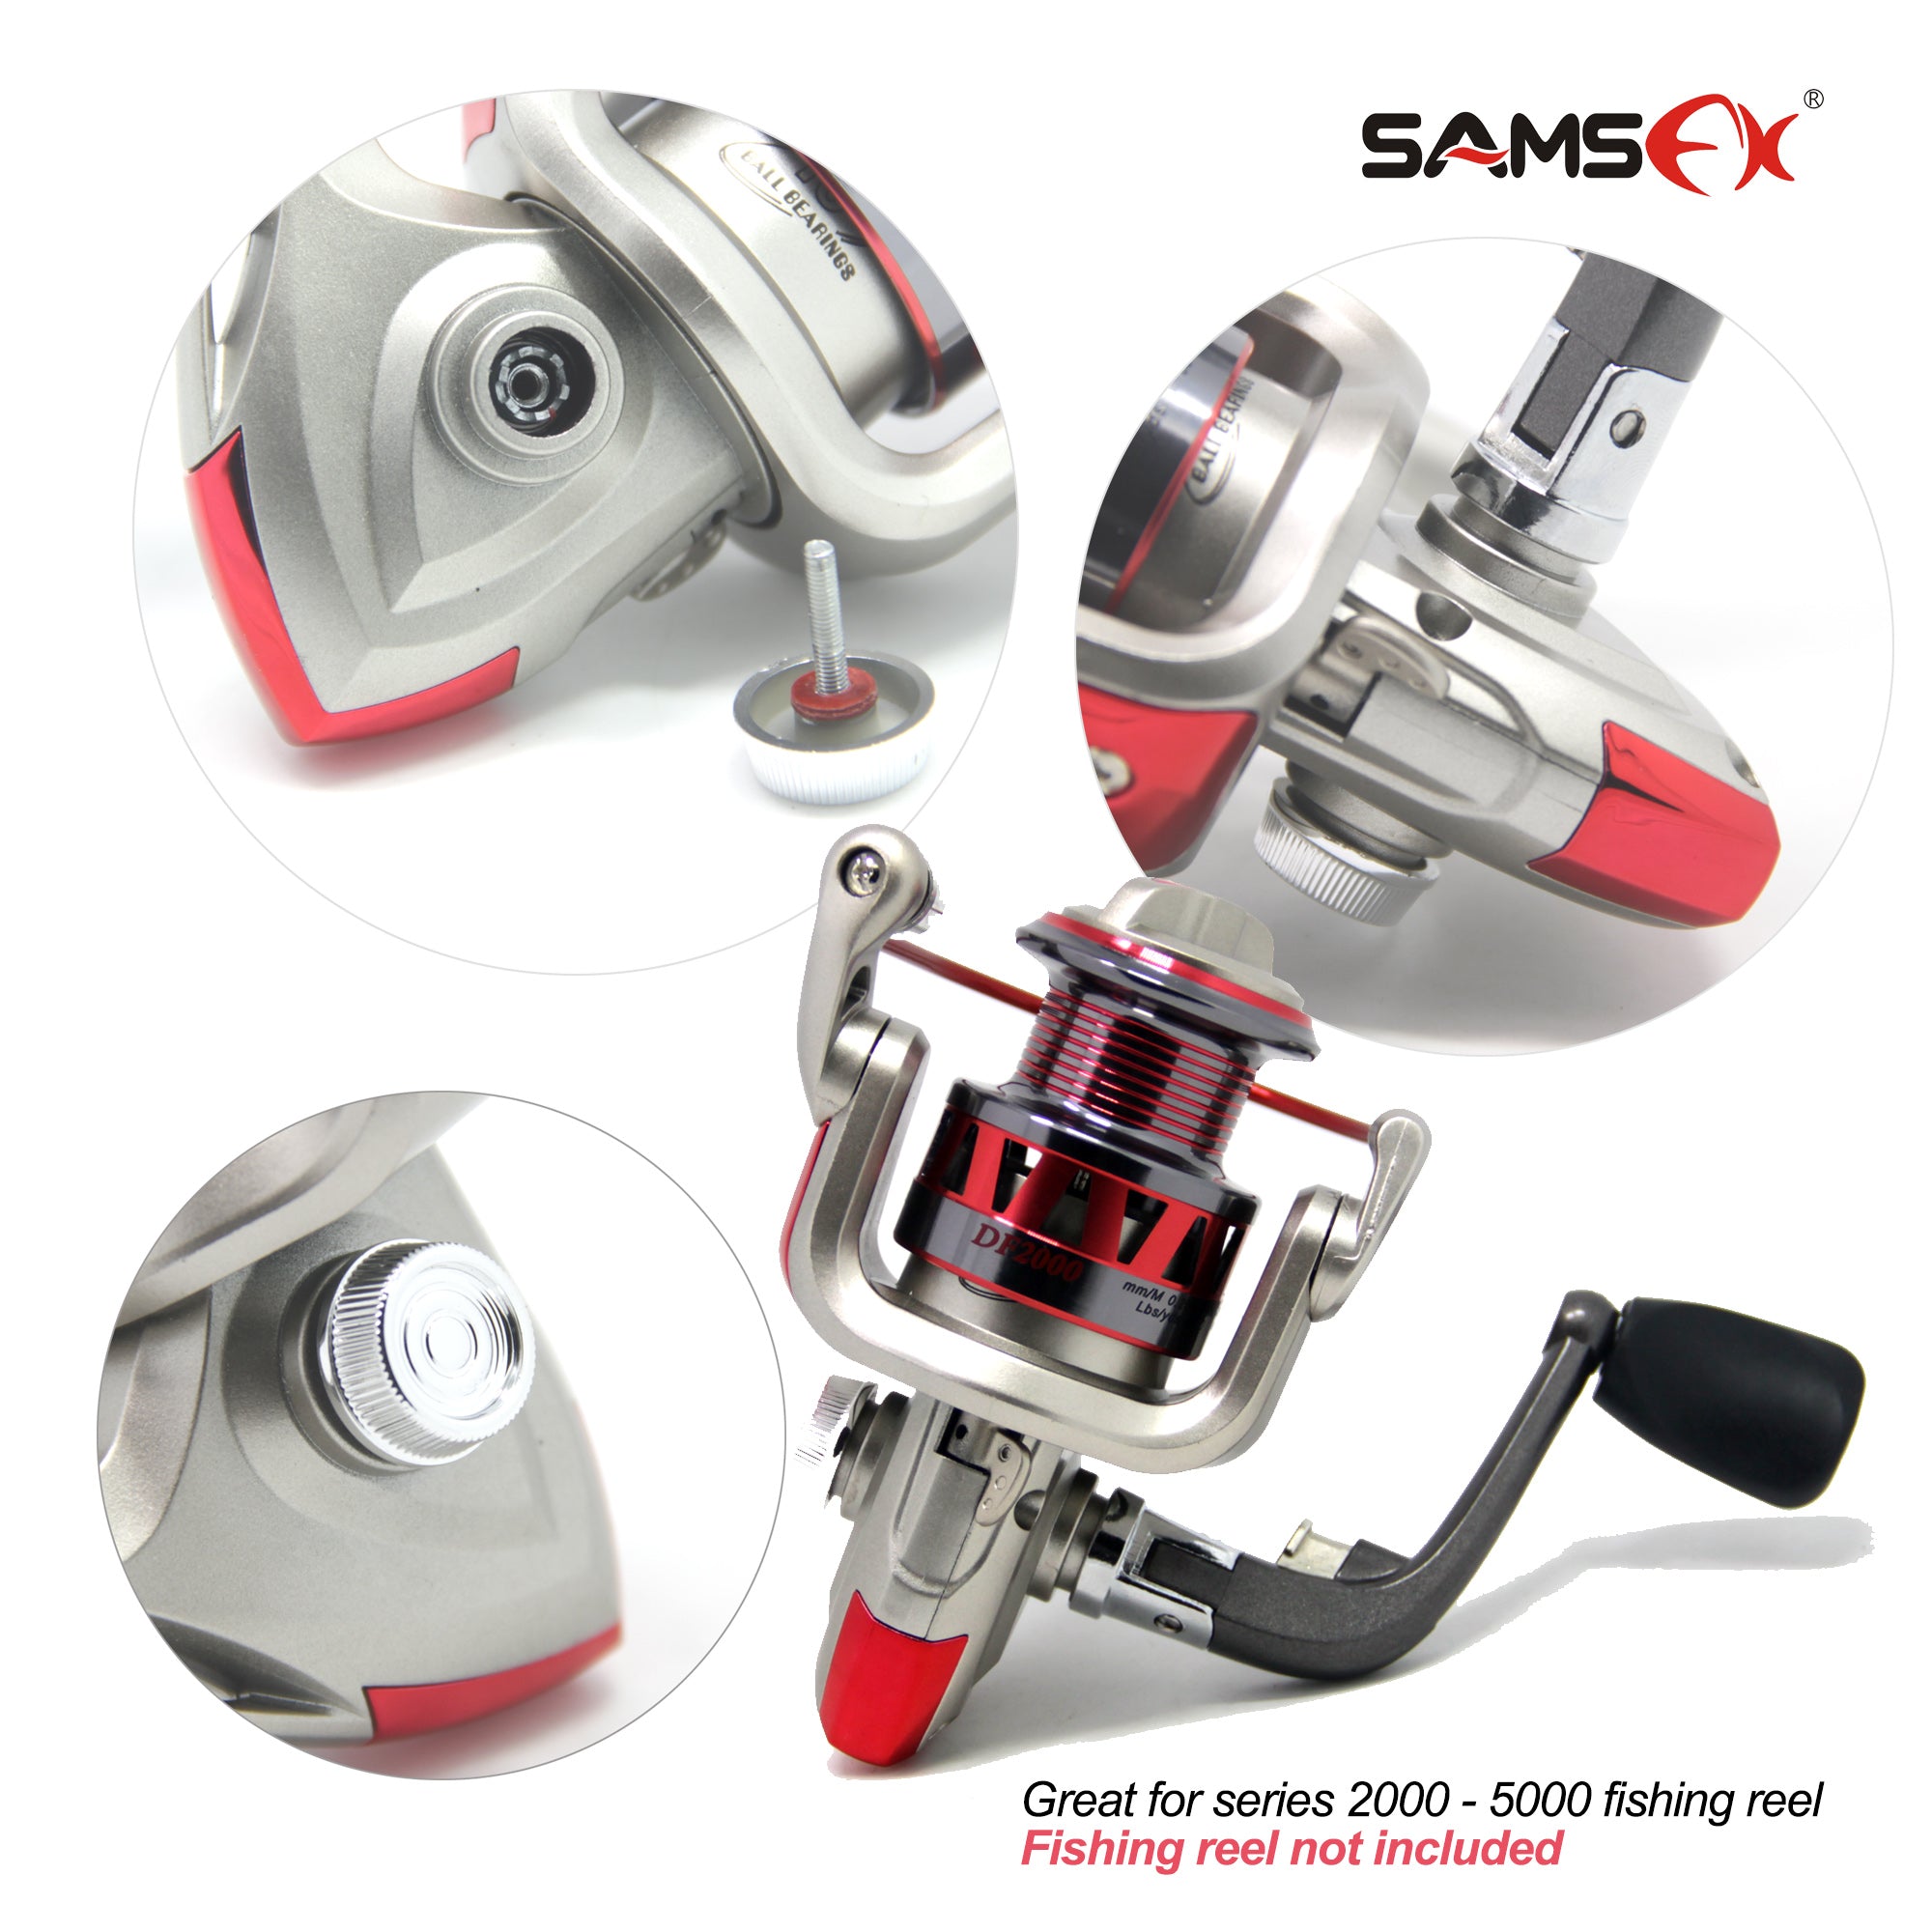 DZX Fishing Reel Parts - Replacement Parts for Fishing Reel Swing